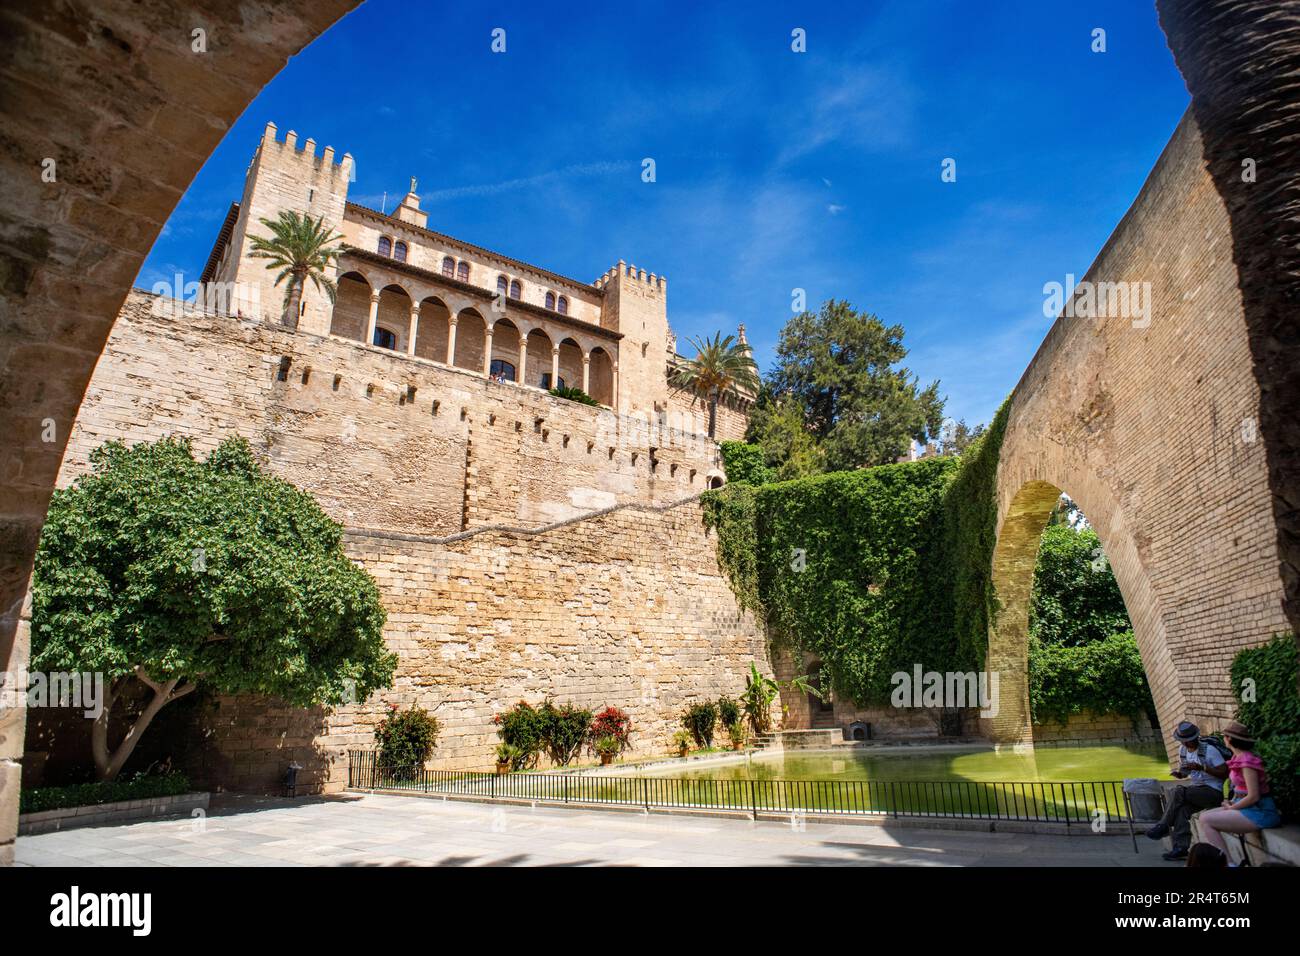 Swan lake and the Historic hallway with bows in the basement of the walls named Passeig Dalt Murada next to the Royal Palace of la Almudaina.  The Roy Stock Photo